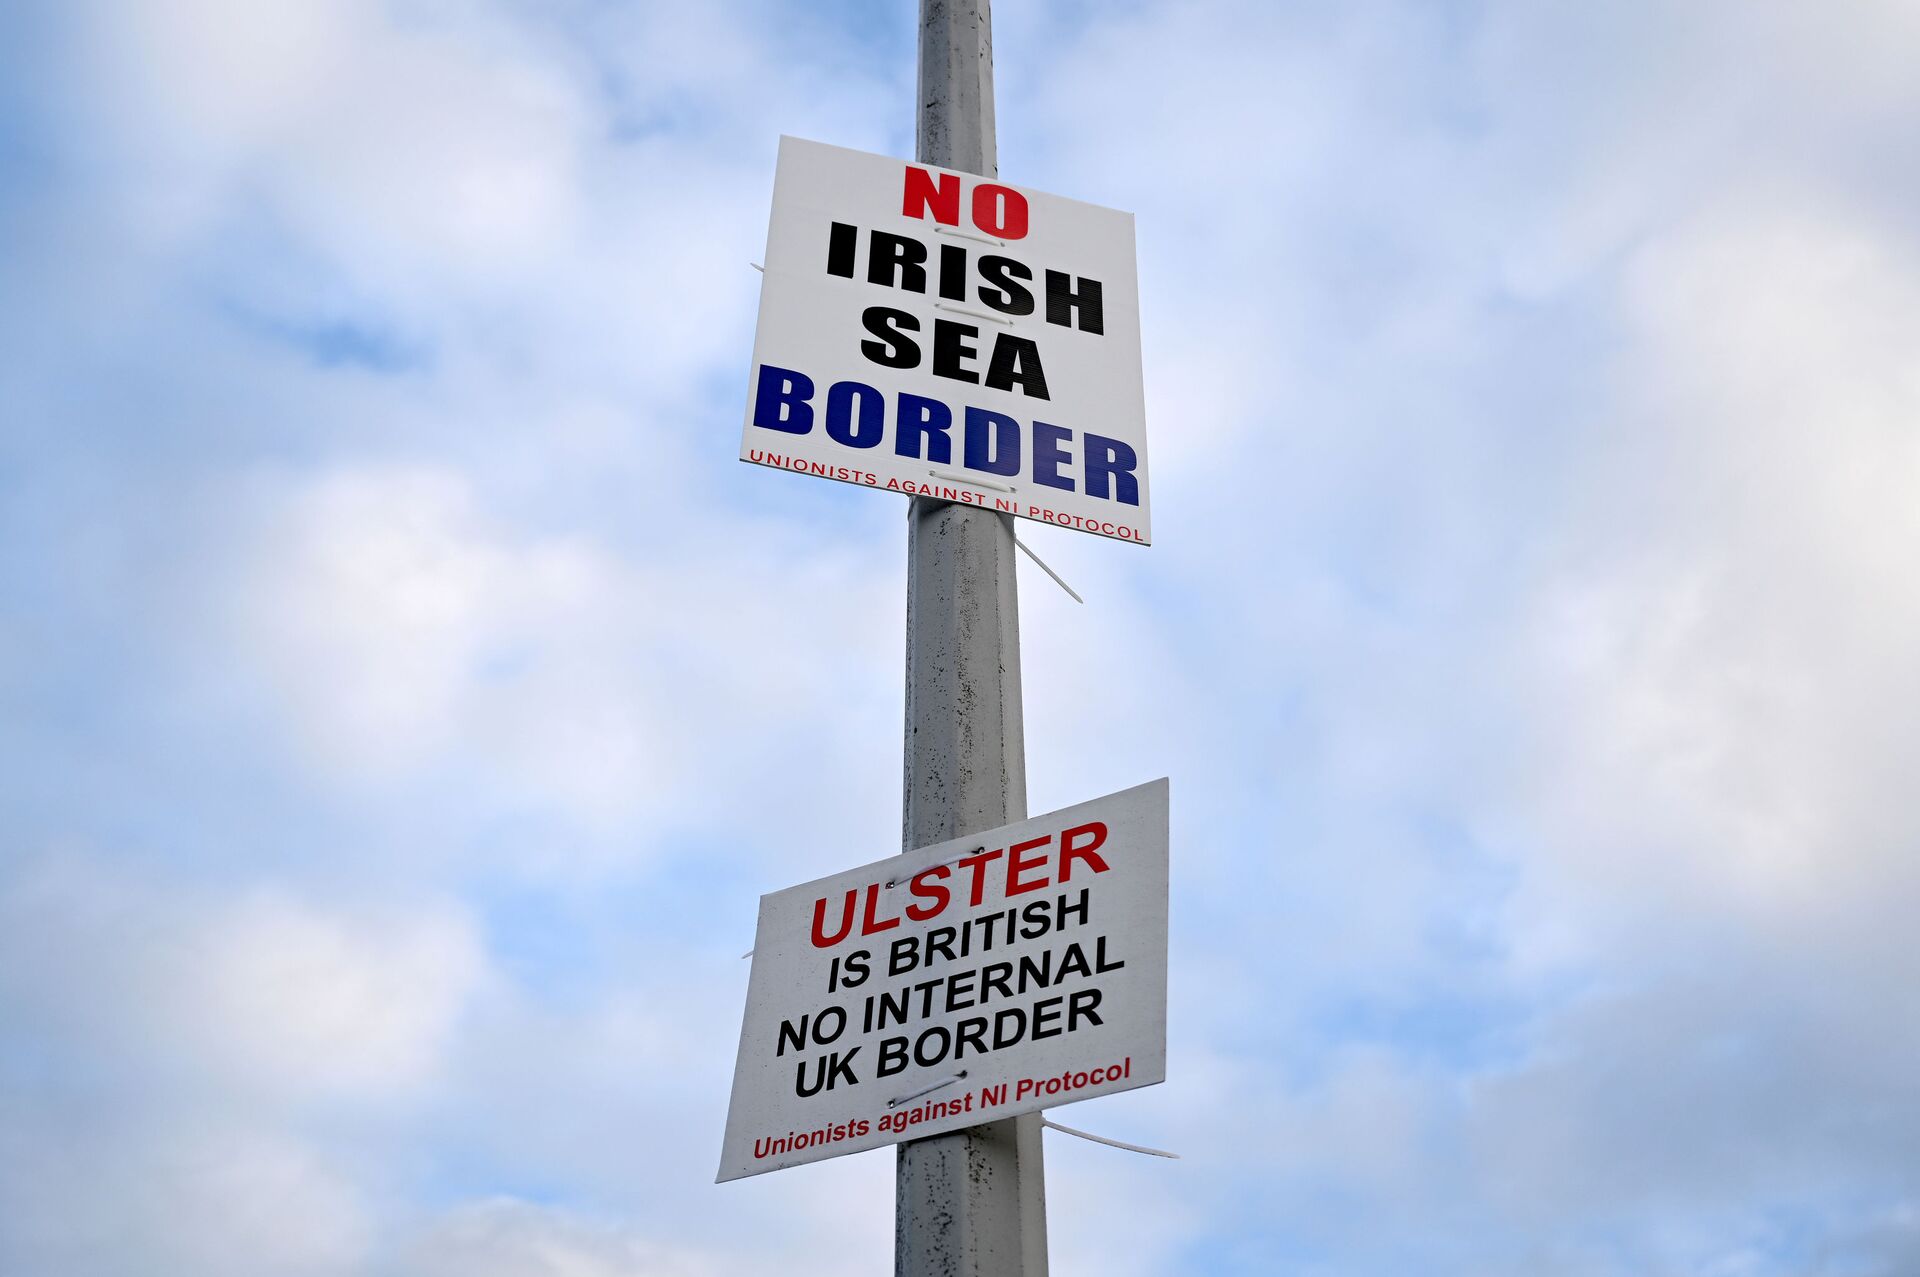 Signs reading 'No Irish Sea border' and 'Ulster is British, no internal UK Border' are seen affixed to a lamp post at the Port of Larne, Northern Ireland, March 6, 2021. Picture taken March 6, 2021 - Sputnik International, 1920, 14.09.2021